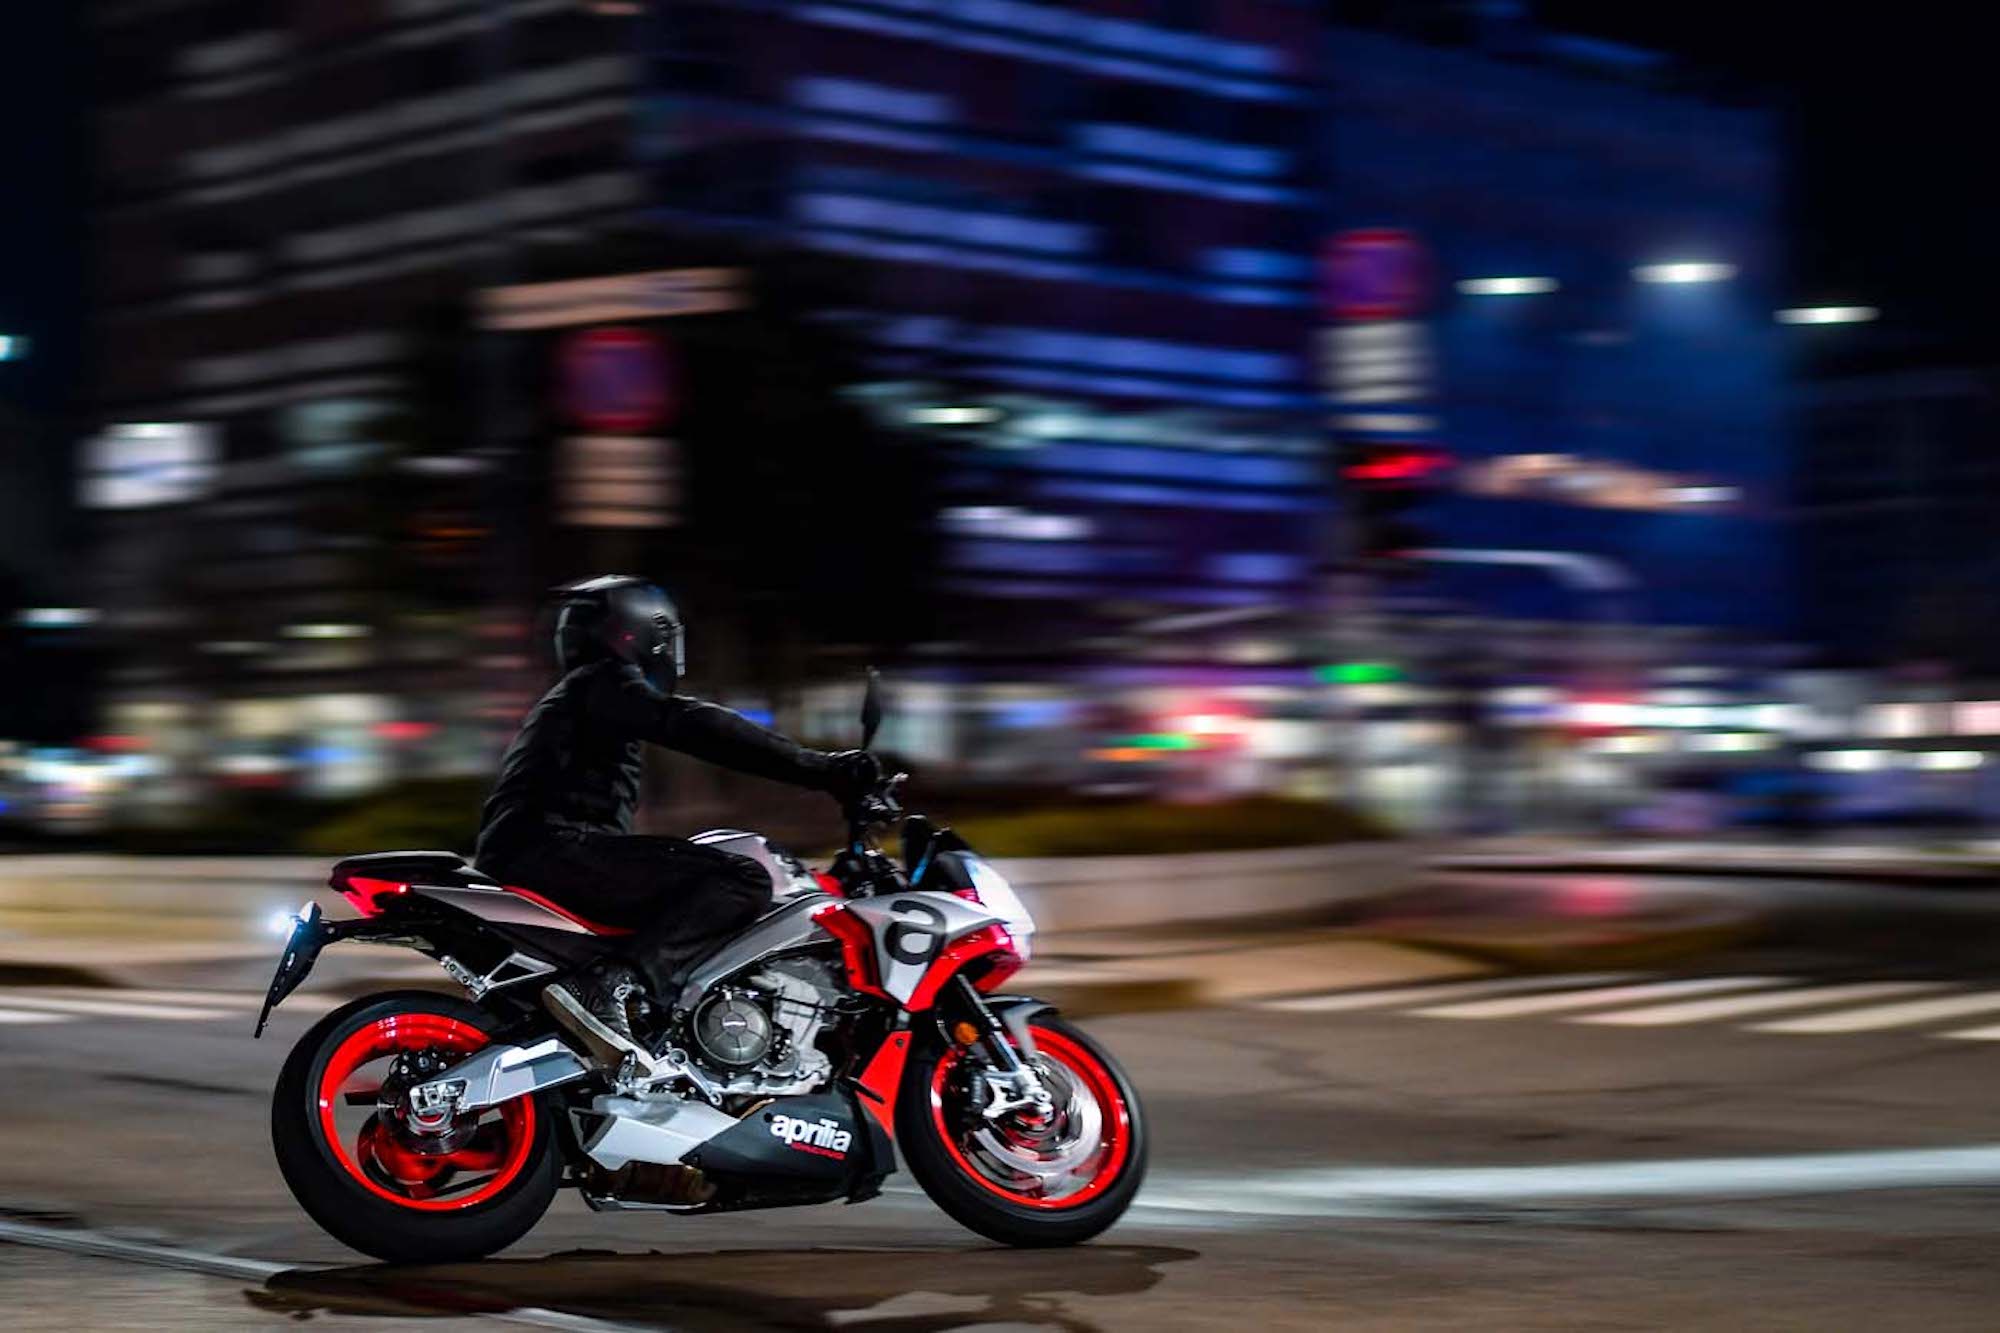 A motorcyclist enjoying a nocturnal cruise. Media sourced from Mans World India.